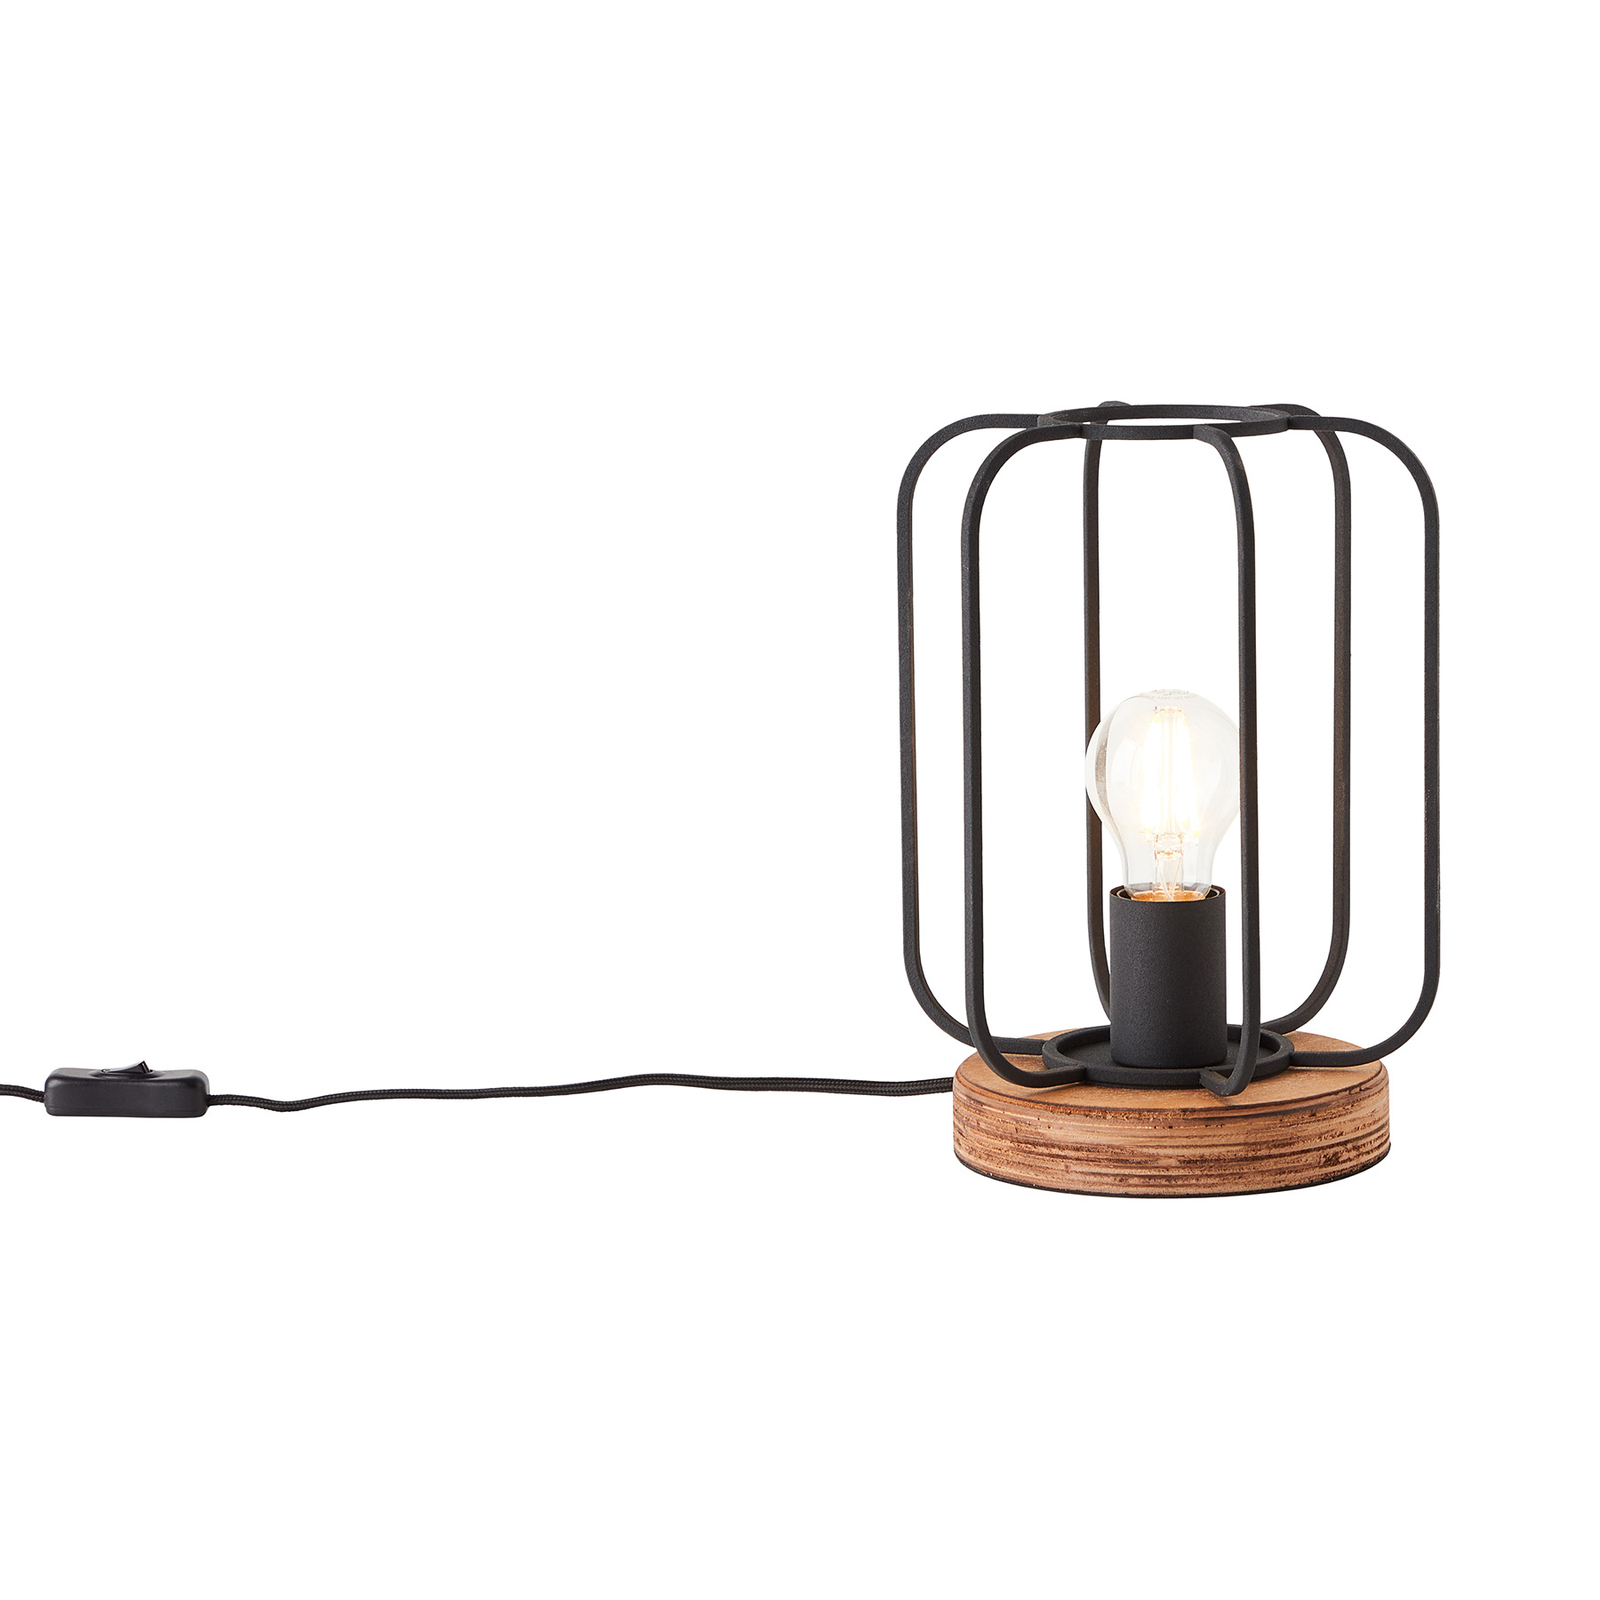 Tosh table lamp with a wooden base